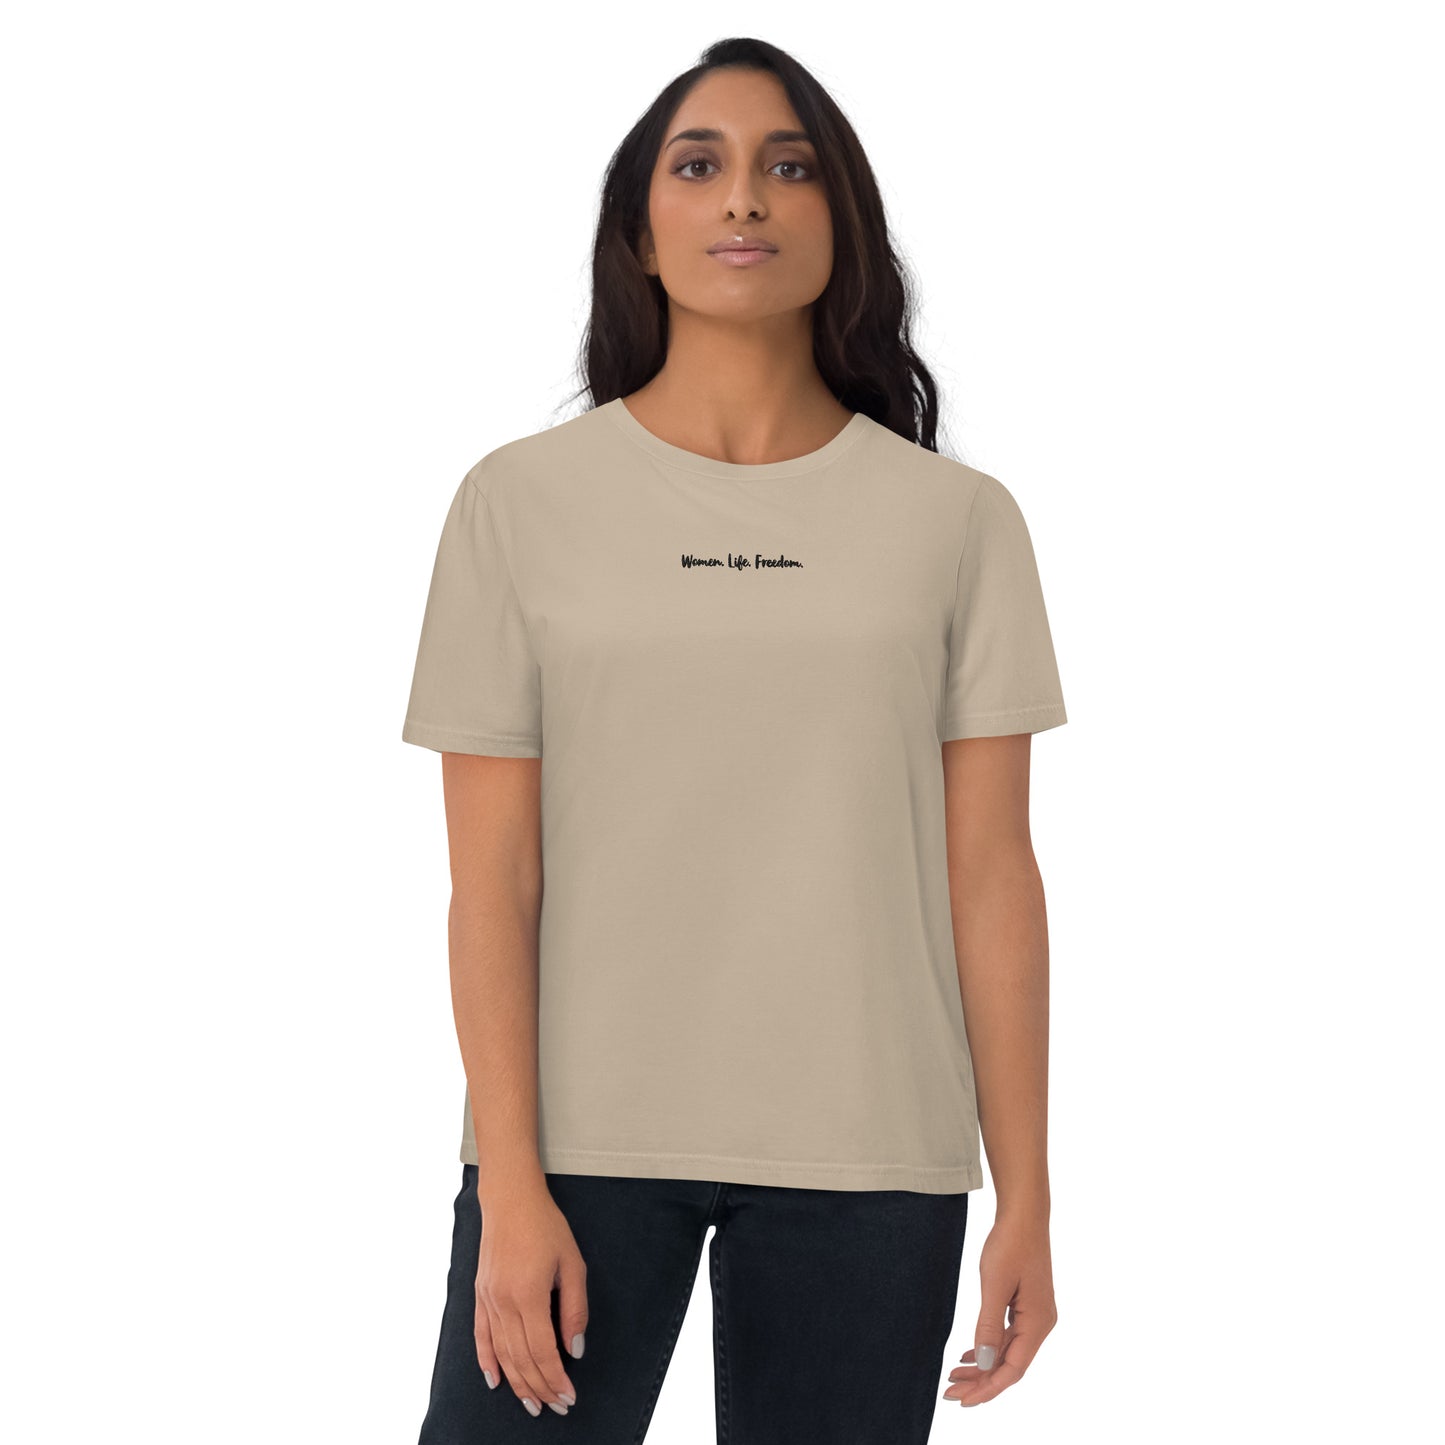 Women. Life. Freedom. T-shirt in Sand. In support for Women's equal rights